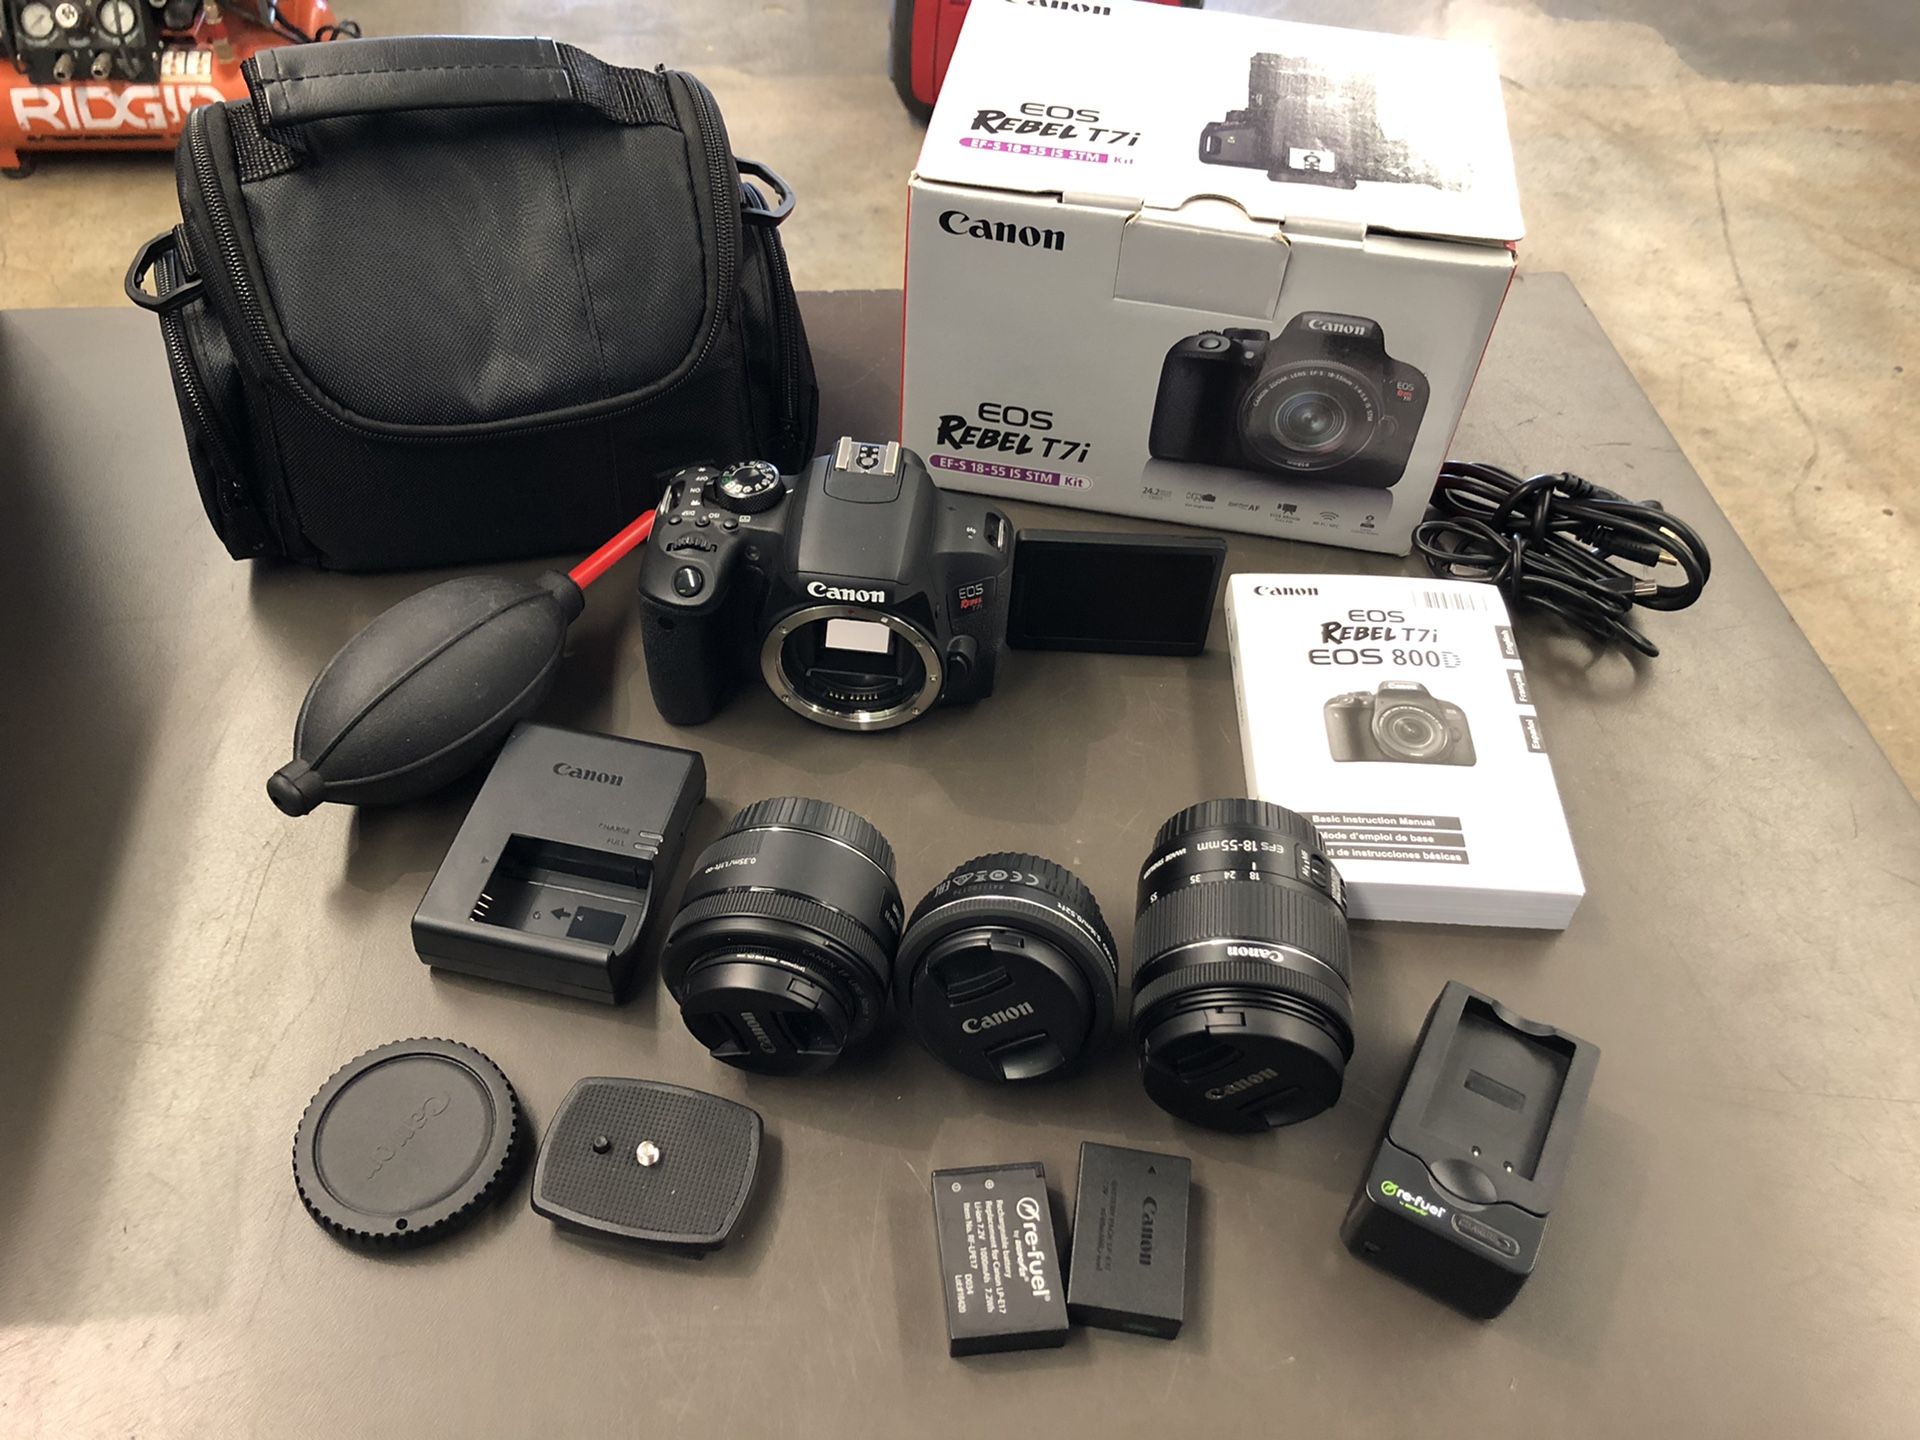 Canon EOS Rebel T7i with 3 lenses EFS 18-55mm, 50mm, EFS 25”4mm 2 chargers and batteries carrying case no trades pick up in Tacoma